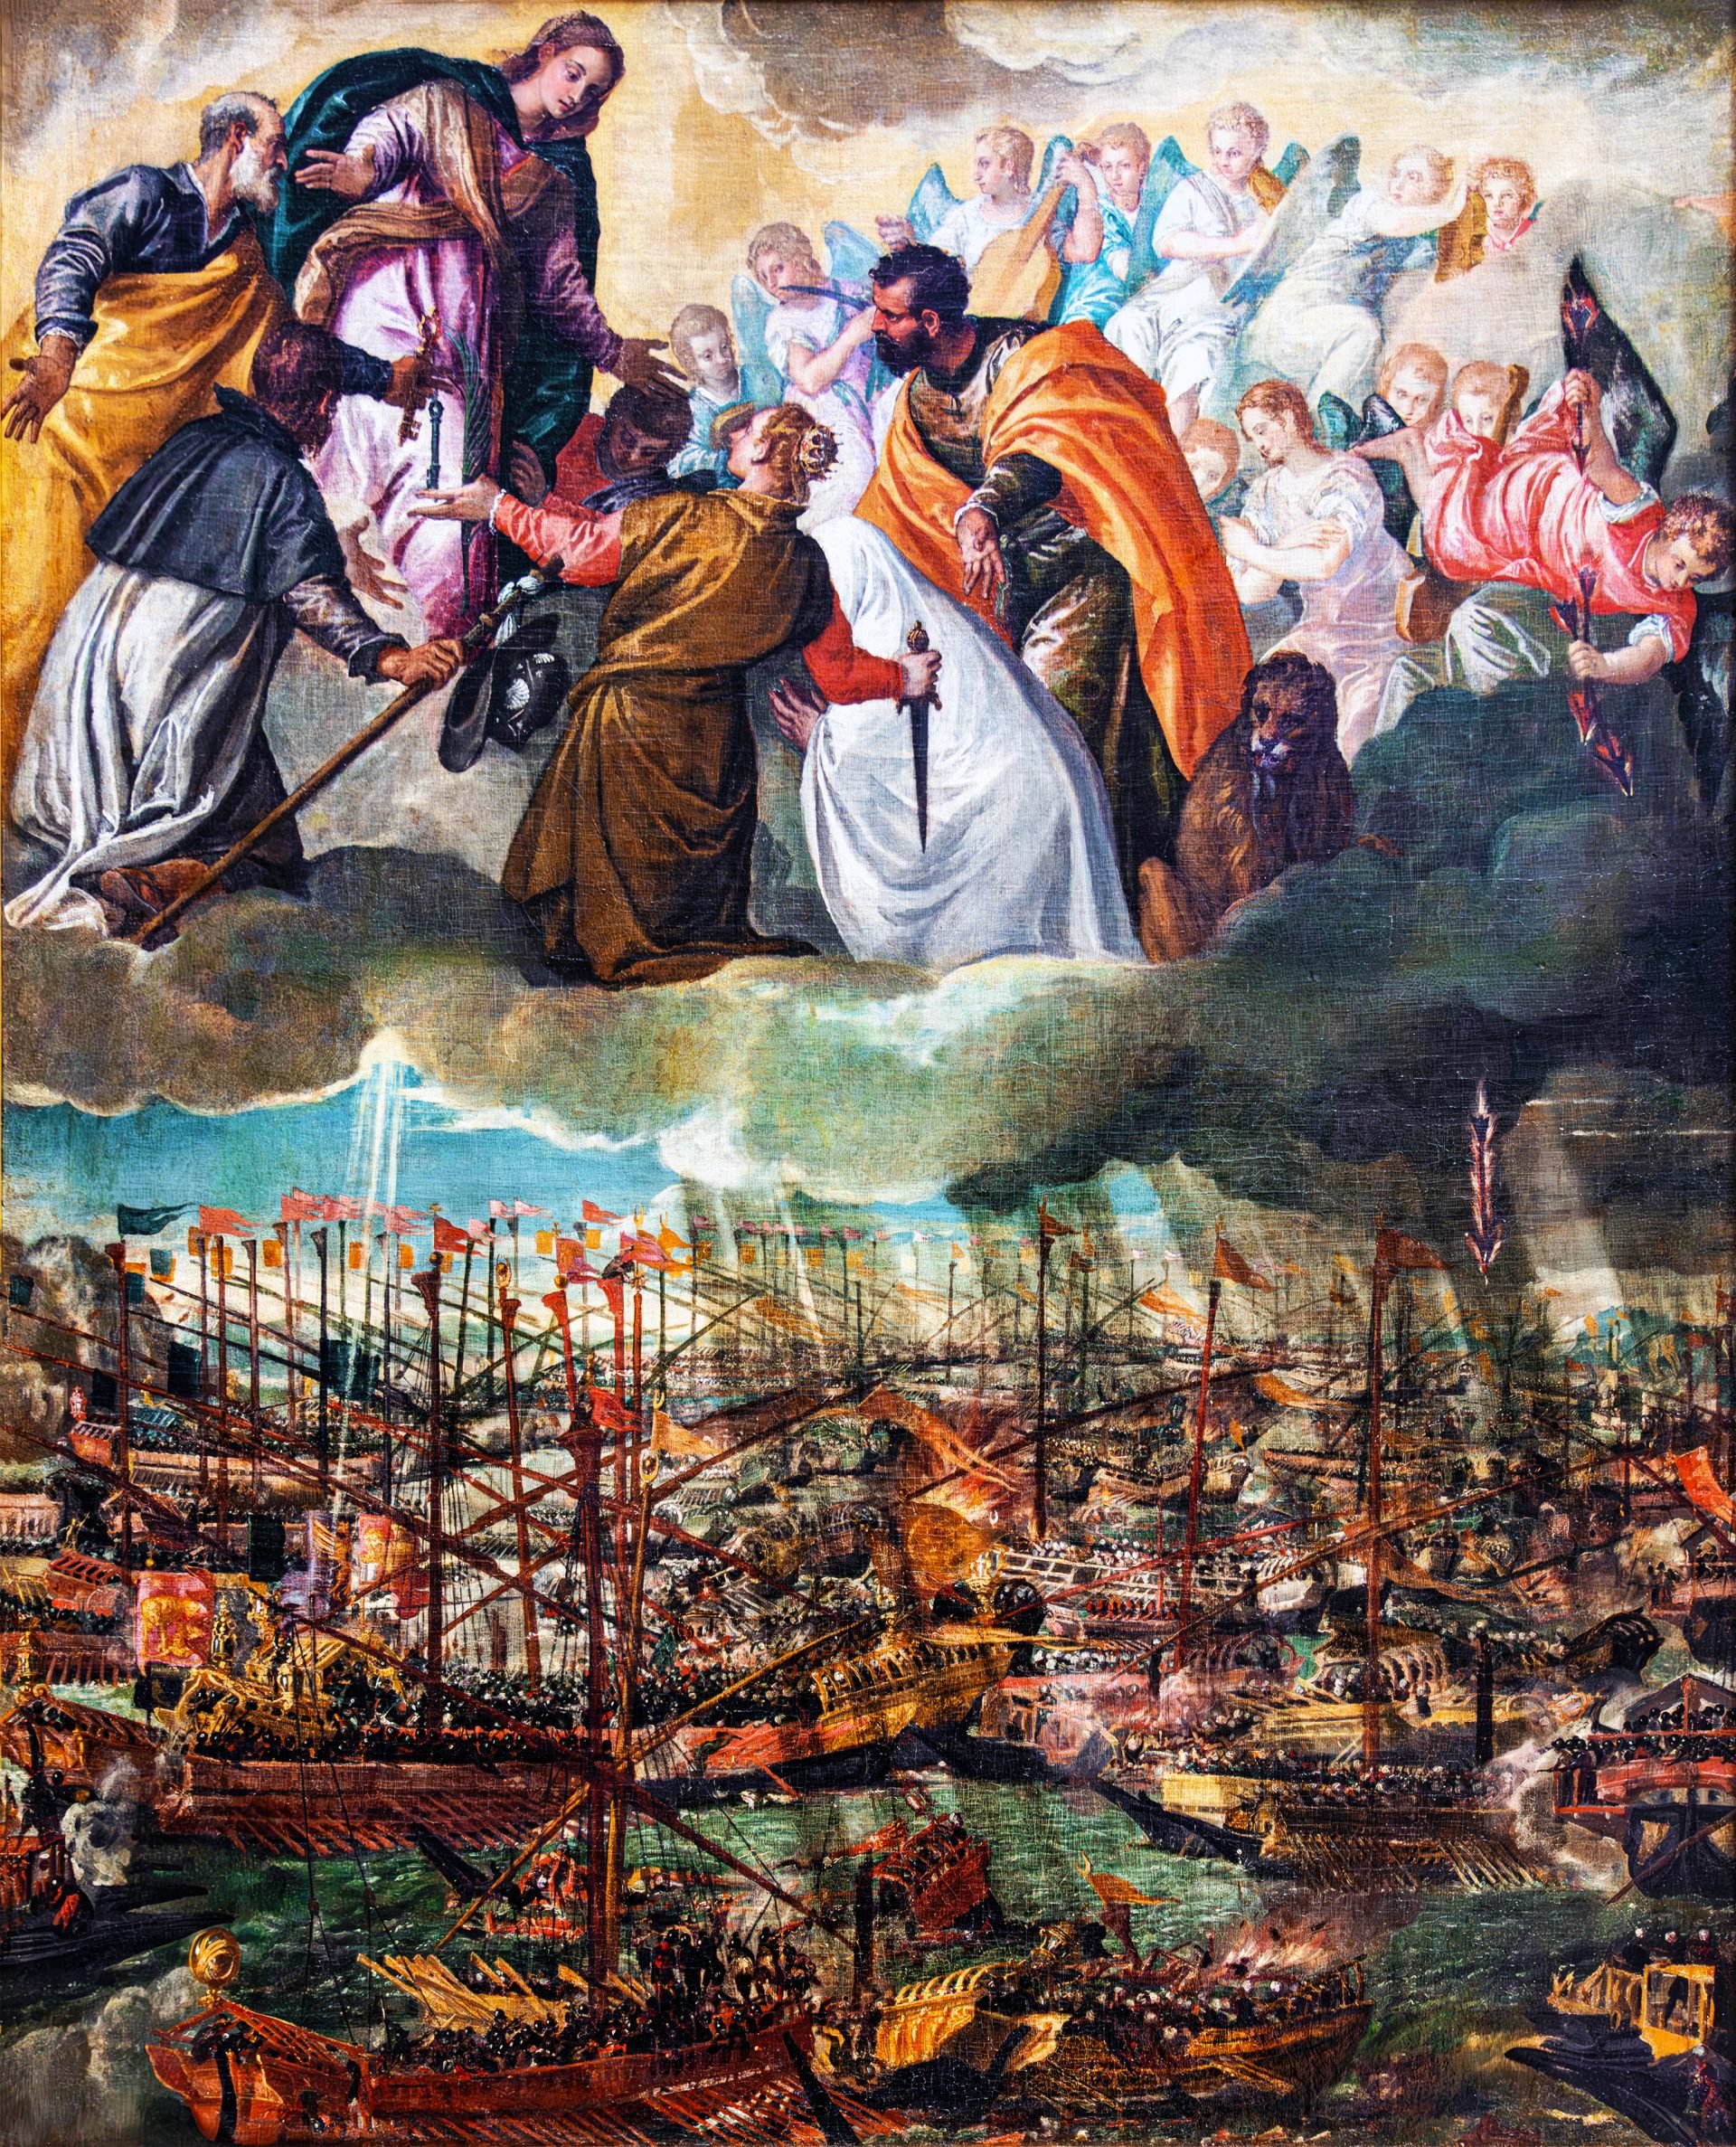 A vivid painting representing the Allegory of the Battle of Lepanto. The top half depicts celestial beings and saints, with a central figure of the Virgin Mary surrounded by angels, bestowing blessings upon Christian warriors below. St. Dominic, identifiable by his traditional habit, kneels in reverence, while other saintly figures are engaged in prayer or action. A looming, dark cloud separates the heavenly scene from the terrestrial below. The bottom half portrays a chaotic naval battle with numerous ships bearing flags, densely packed on a turbulent sea. Flames engulf some vessels, while plumes of smoke rise, indicating the intense warfare. The intricacies of the ships, from their masts to the combatants aboard, are intricately detailed, capturing the ferocity and significance of the Battle of Lepanto.